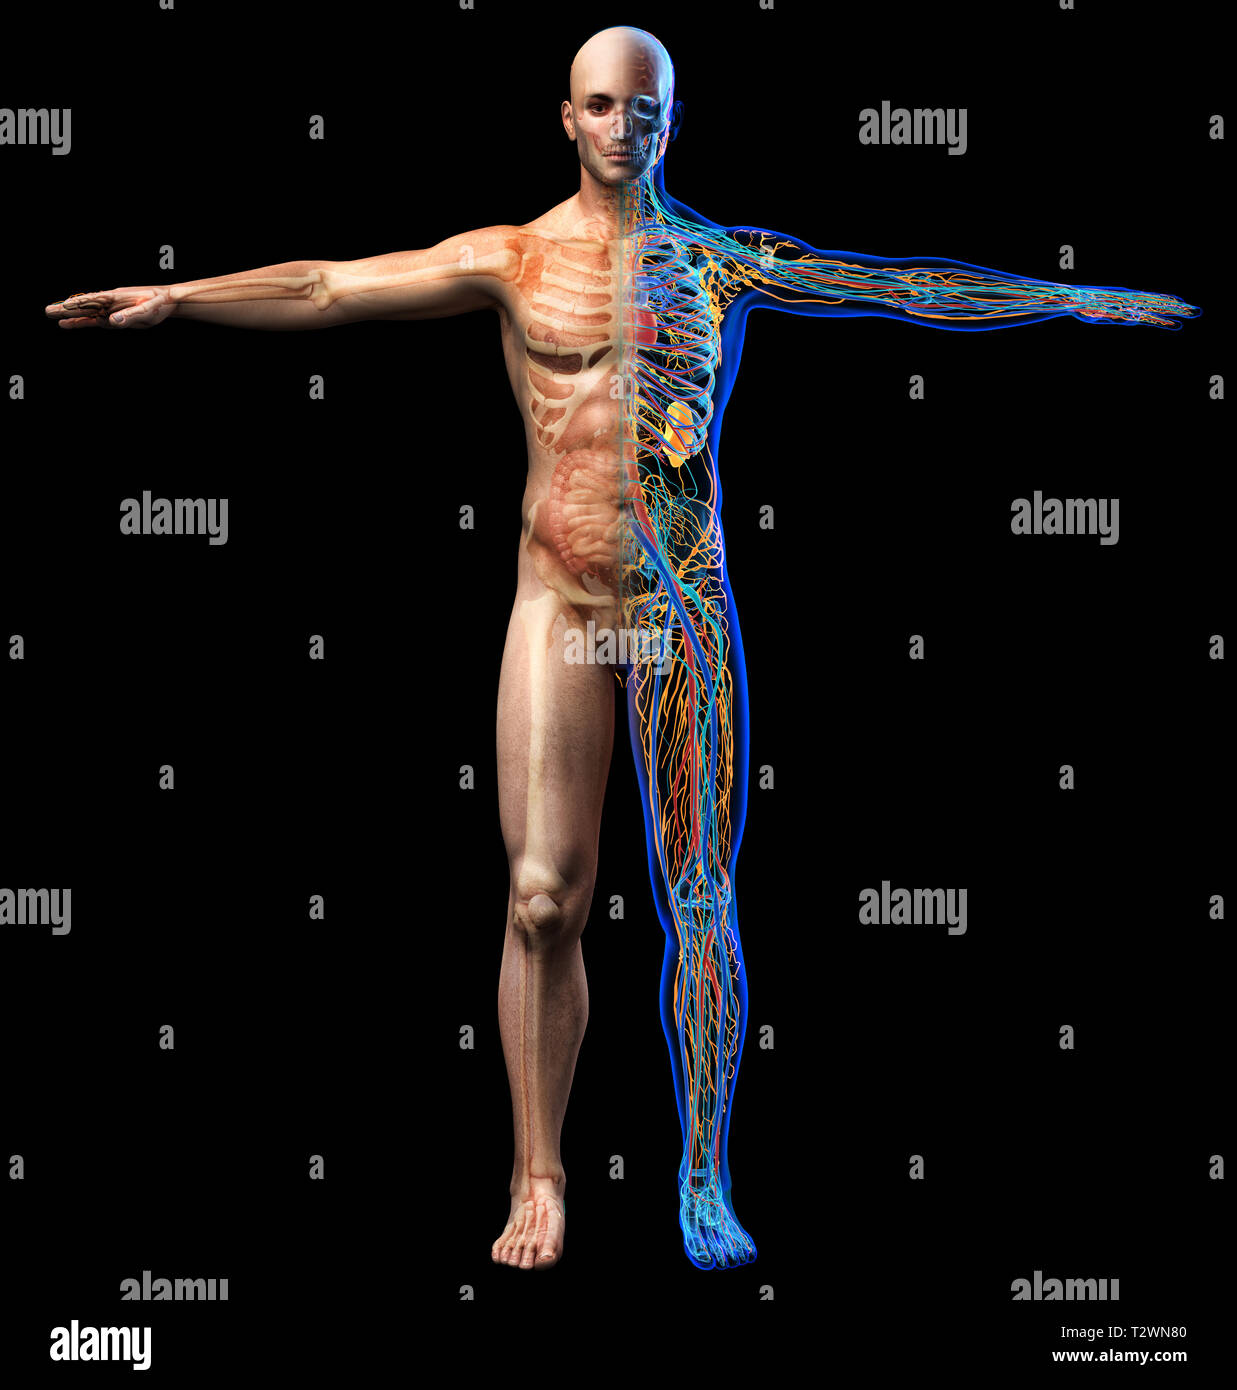 Man skeletal, internal organs diagram and x-ray anatomy systems. Full figure standing on black background. Front view. Stock Photo